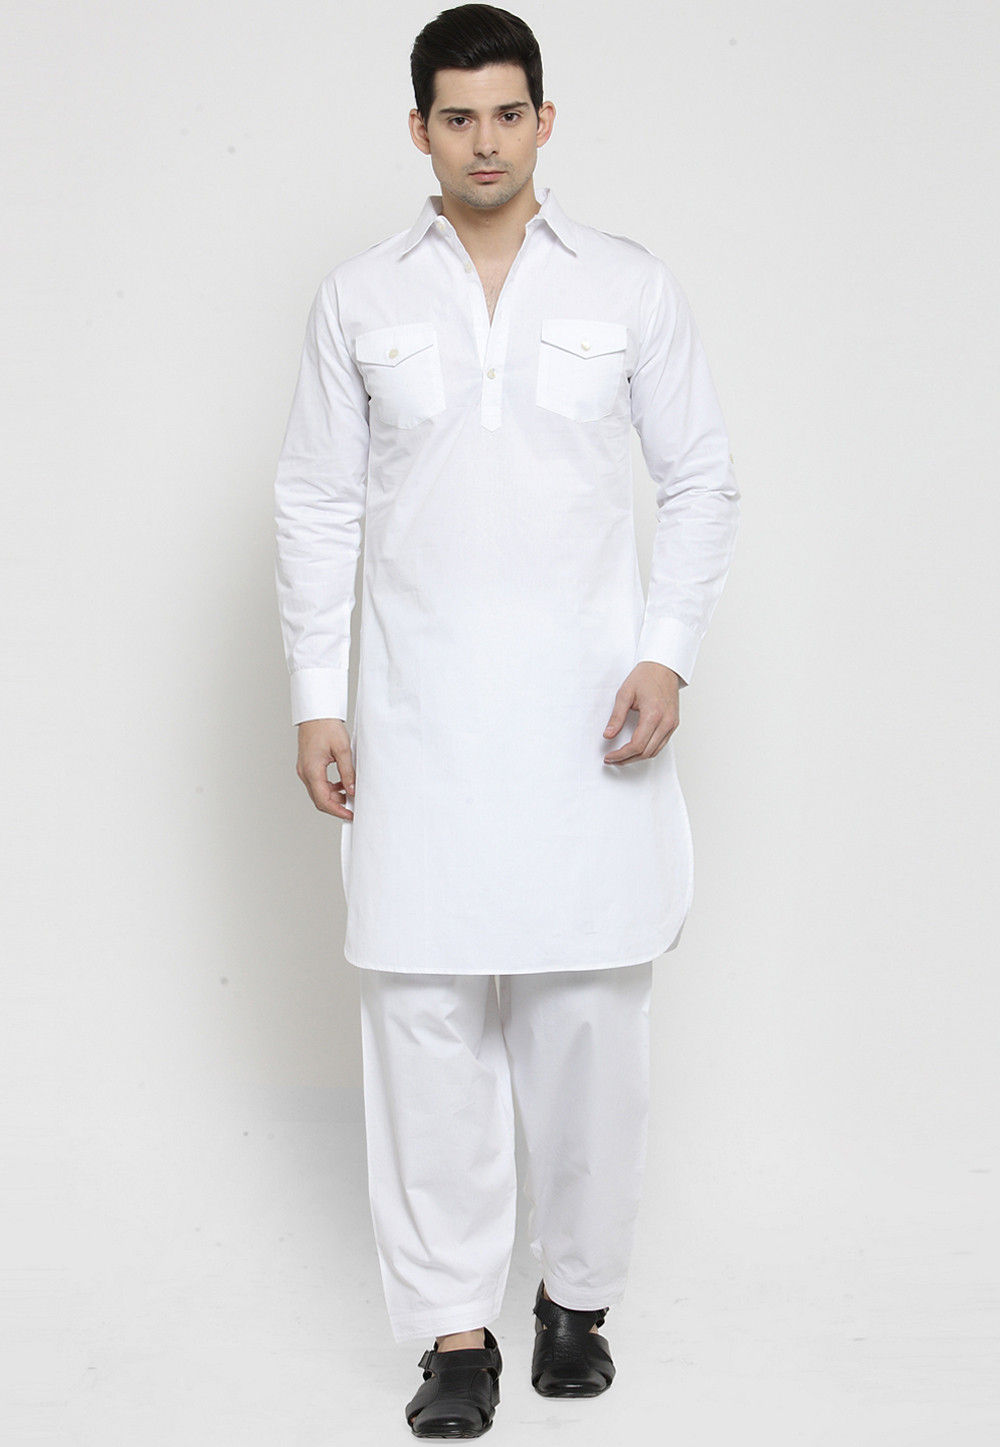 Details about   Classic White Pathani Kurta Salwar Thread Embroidered Neck Cotton Blend 